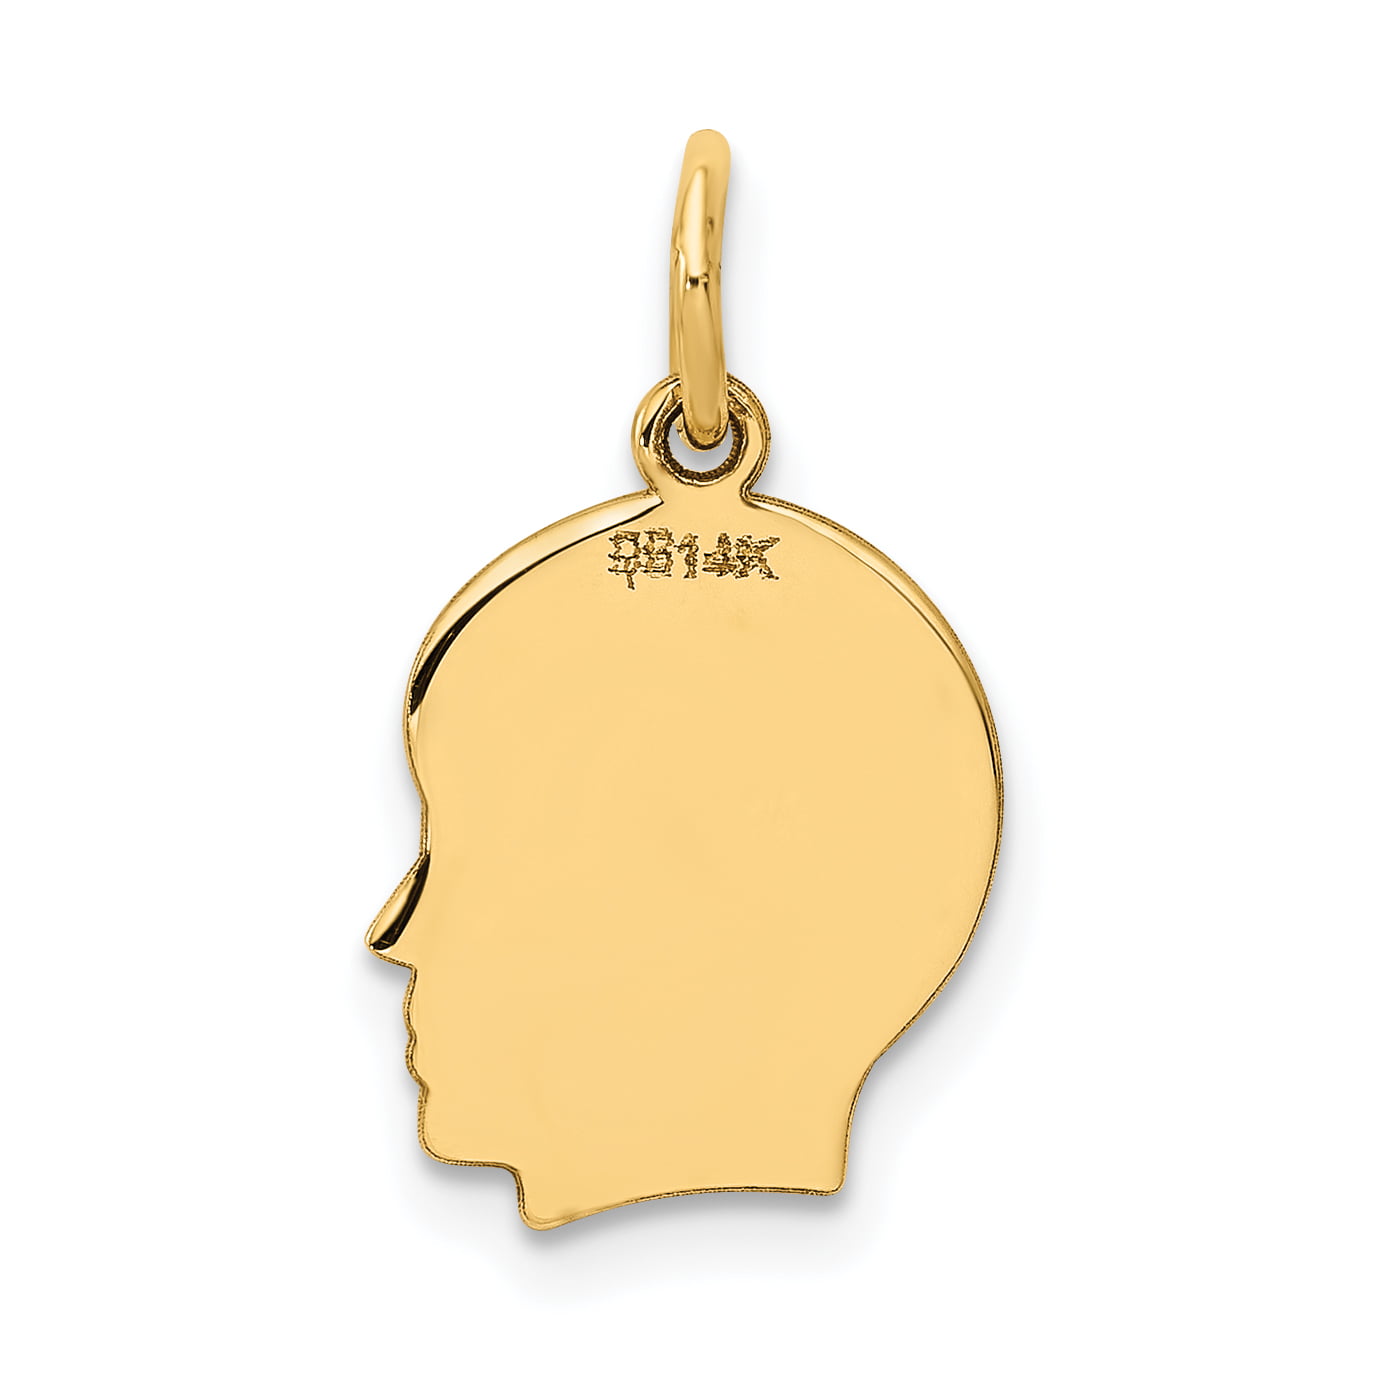 Solid 14k Yellow Gold Plain Small .035 Gauge Facing Left Engravable Girl Head Charm Pendant 18mm Height x 10mm Width 